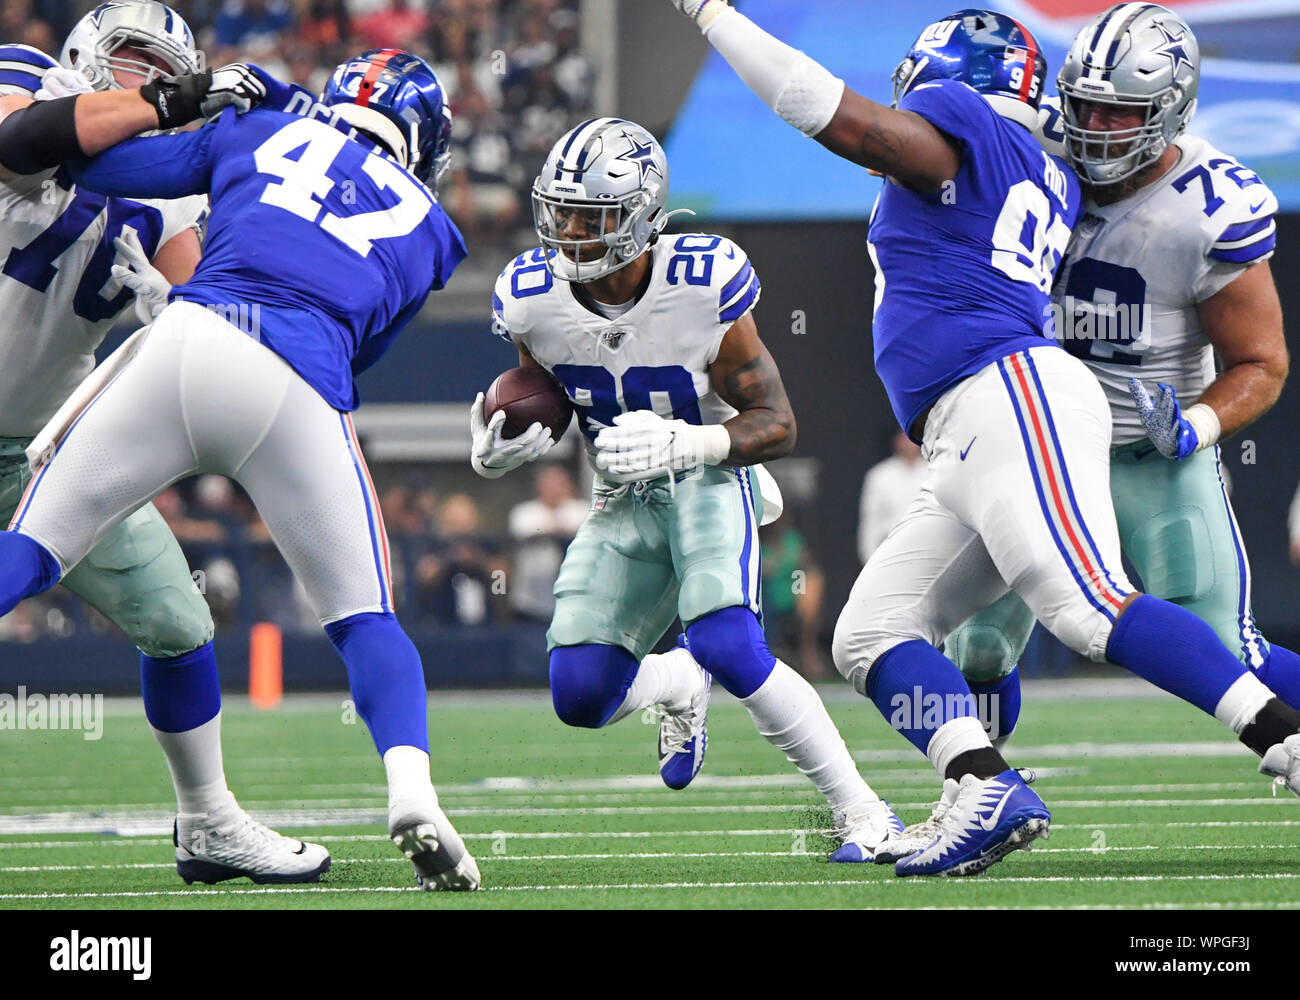 Sep 08, 2019: Dallas Cowboys running back Tony Pollard #20 had 24 yards on 13 caries during an NFL game between the New York Giants and the Dallas Cowboys at AT&T Stadium in Arlington, TX Dallas defeated New York 35-17 Albert Pena/CSM Stock Photo